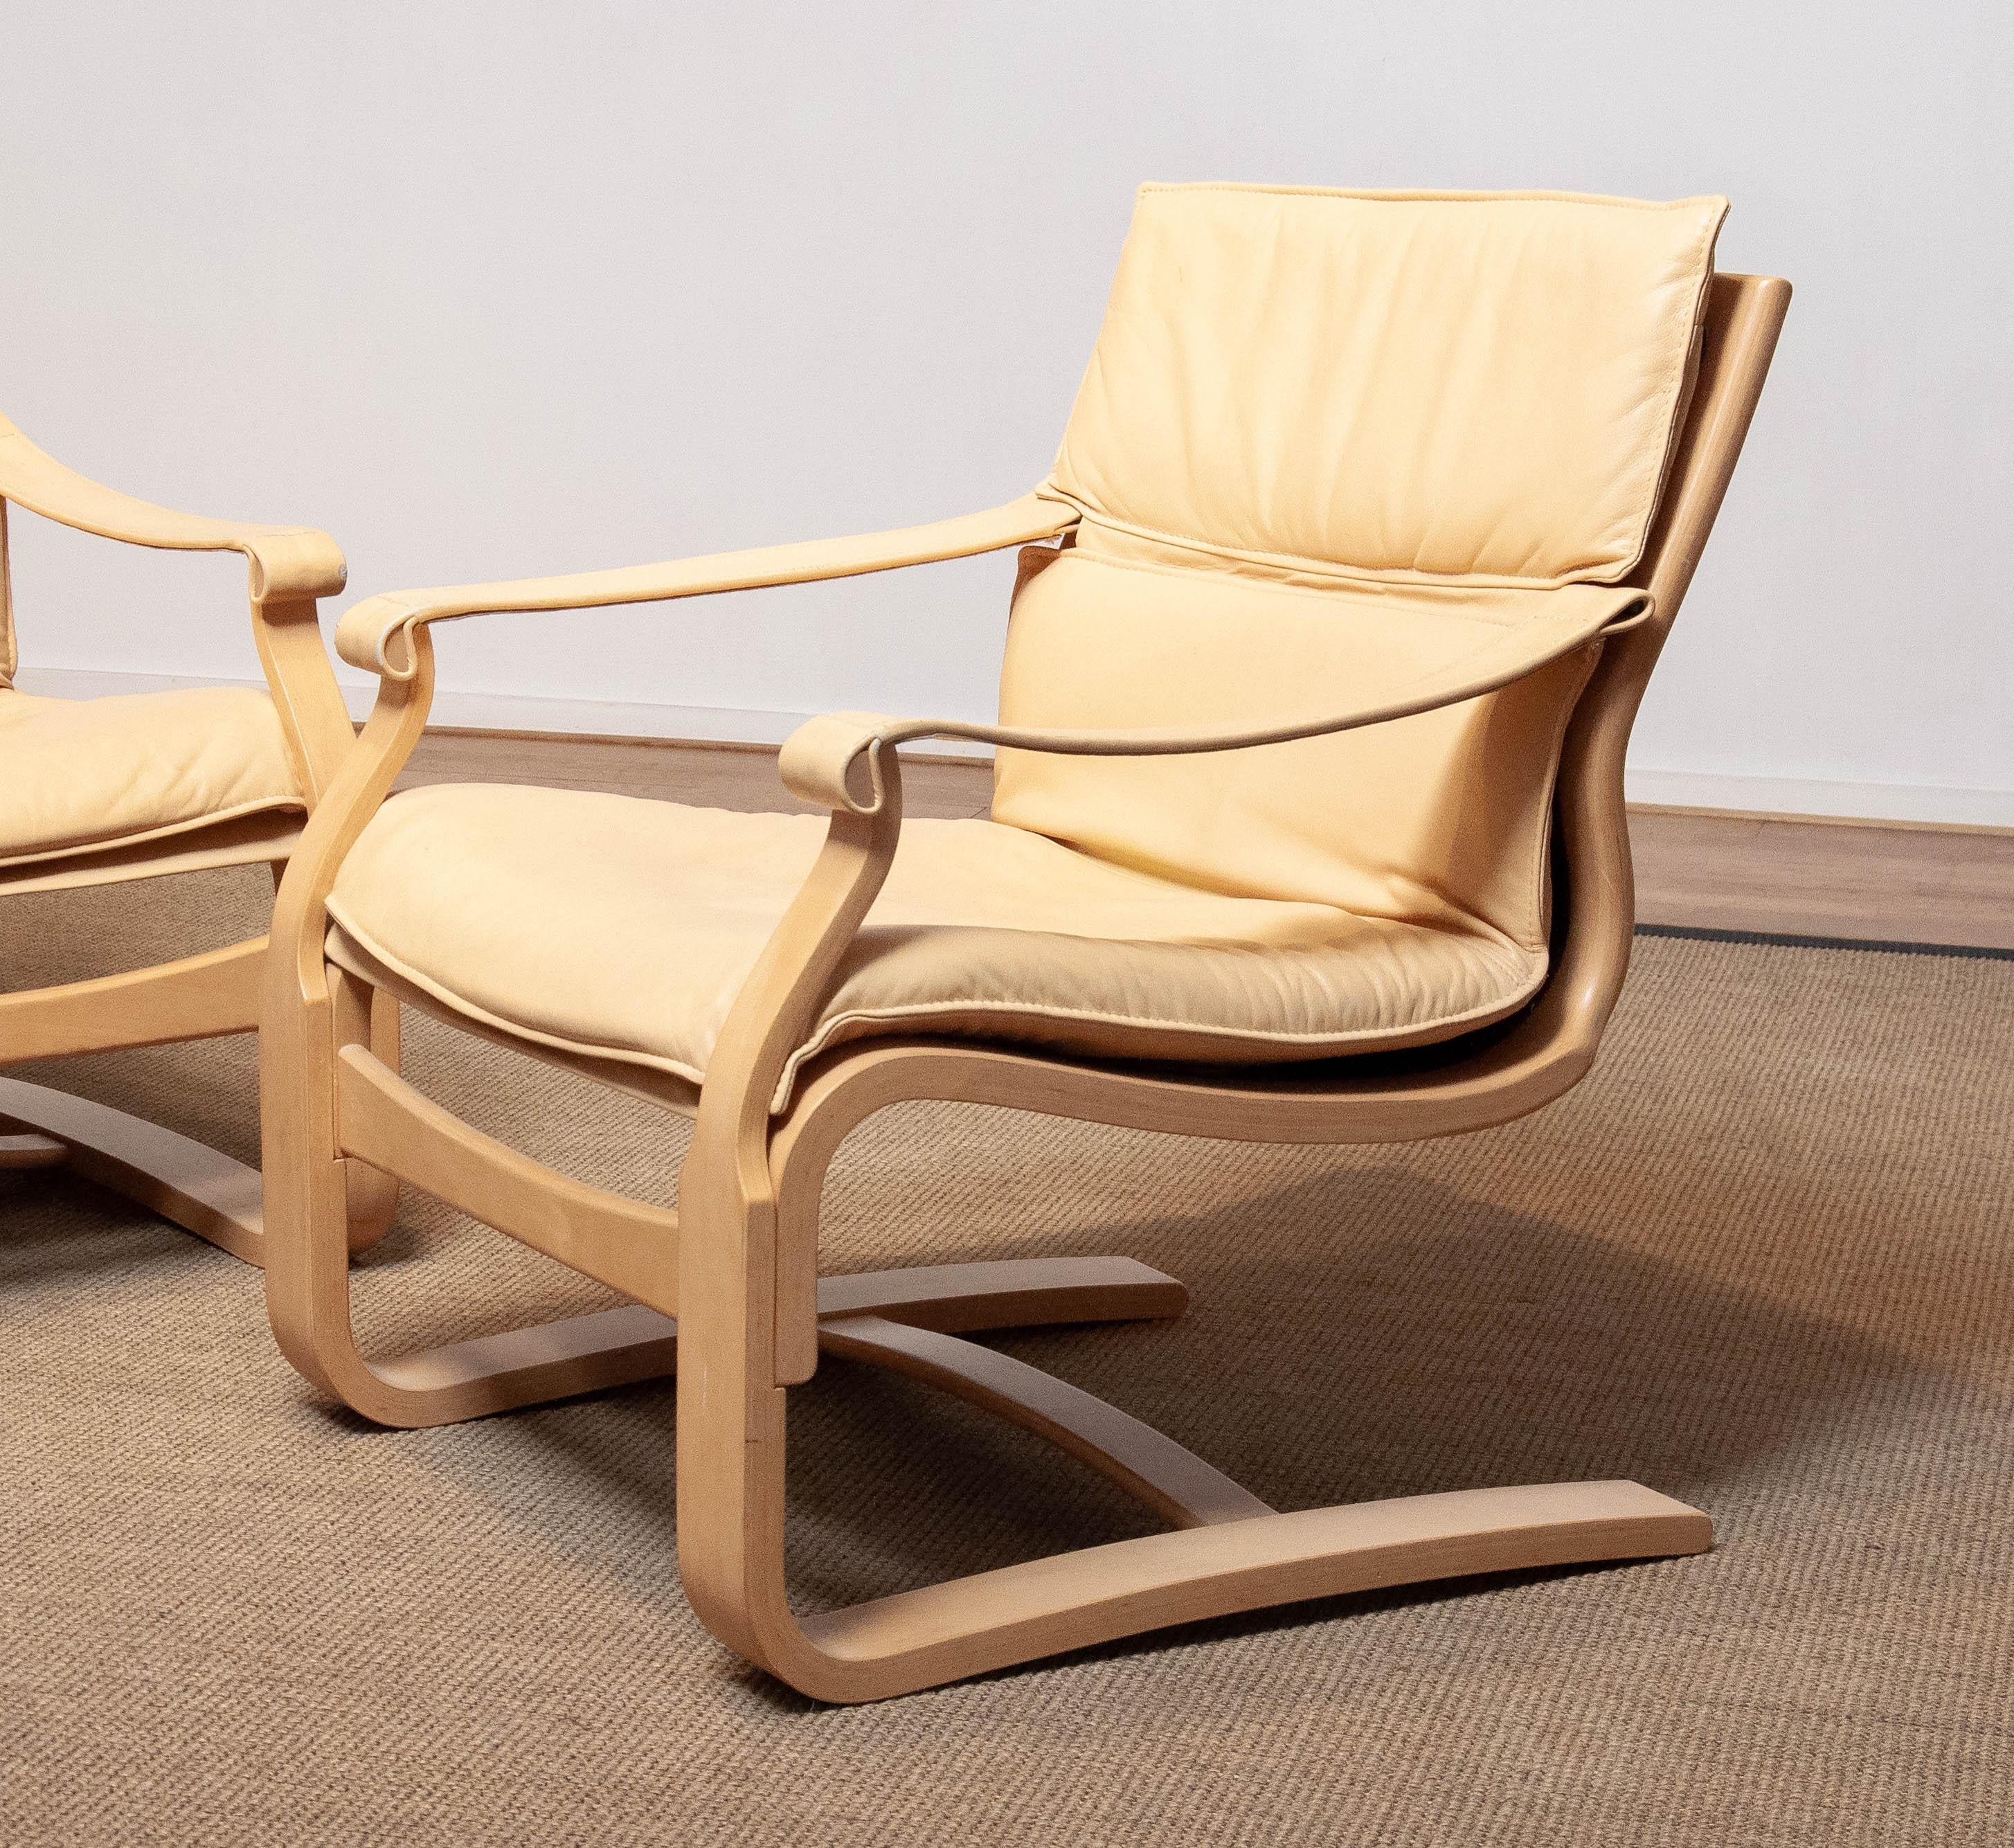 Scandinavian Modern Pair Bentwood with Beige / Creme Leather Lounge Chairs by Ake Fribytter for Nelo For Sale